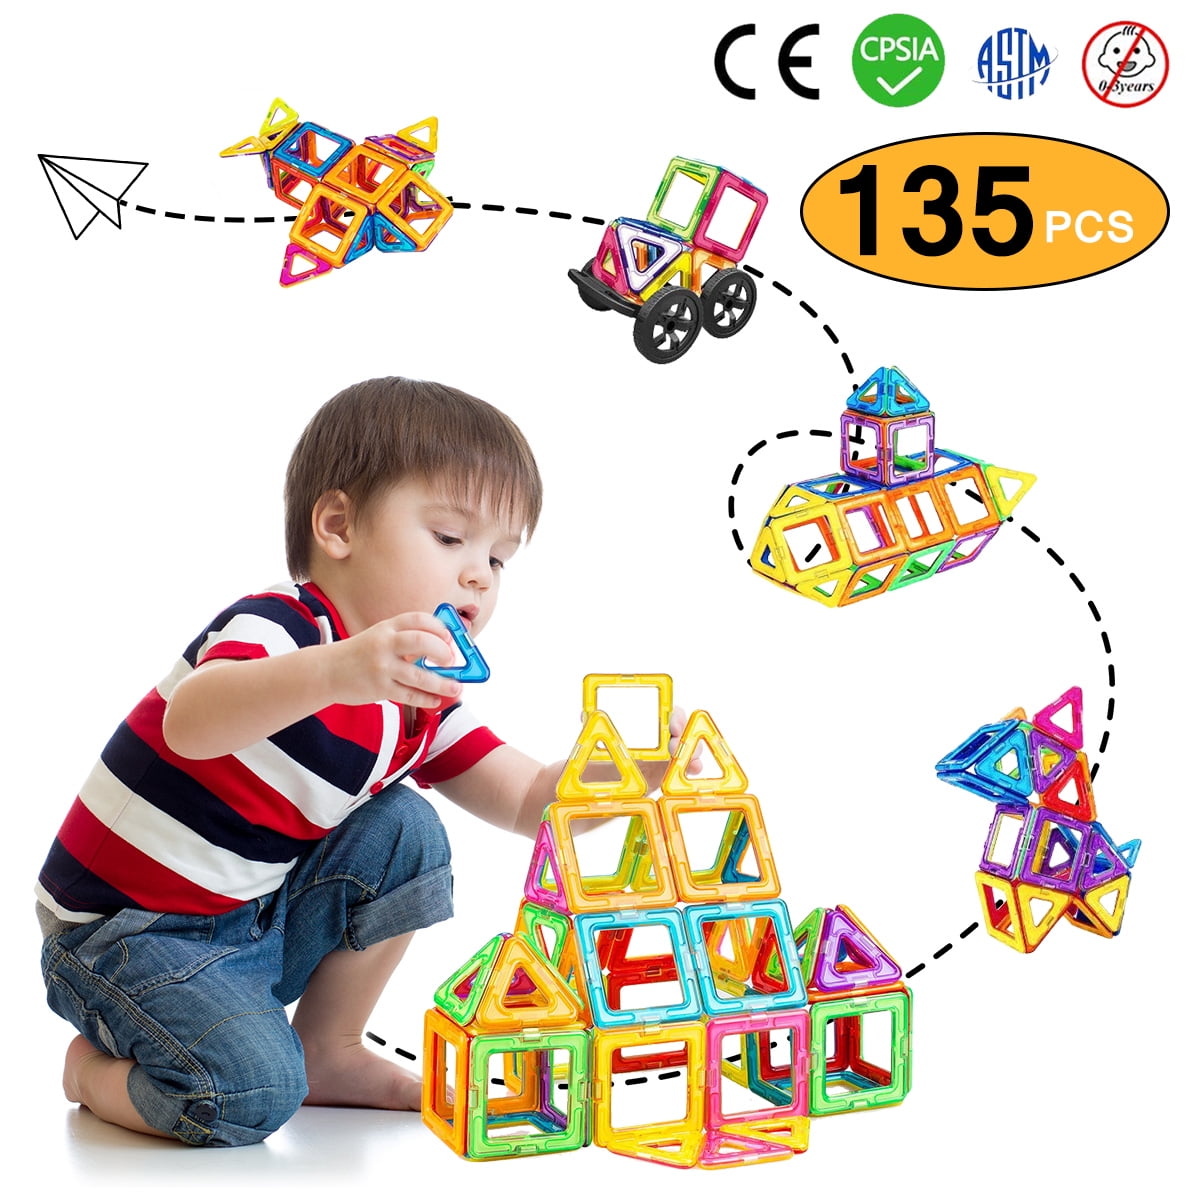 Magnetic Tiles For 2-5 Year Old Boys&Girls 40 pieces with Activities to Learn Math / STEM Concepts Magnetic Blocks Building Set for Kids Minihorse-Educational Building Toys